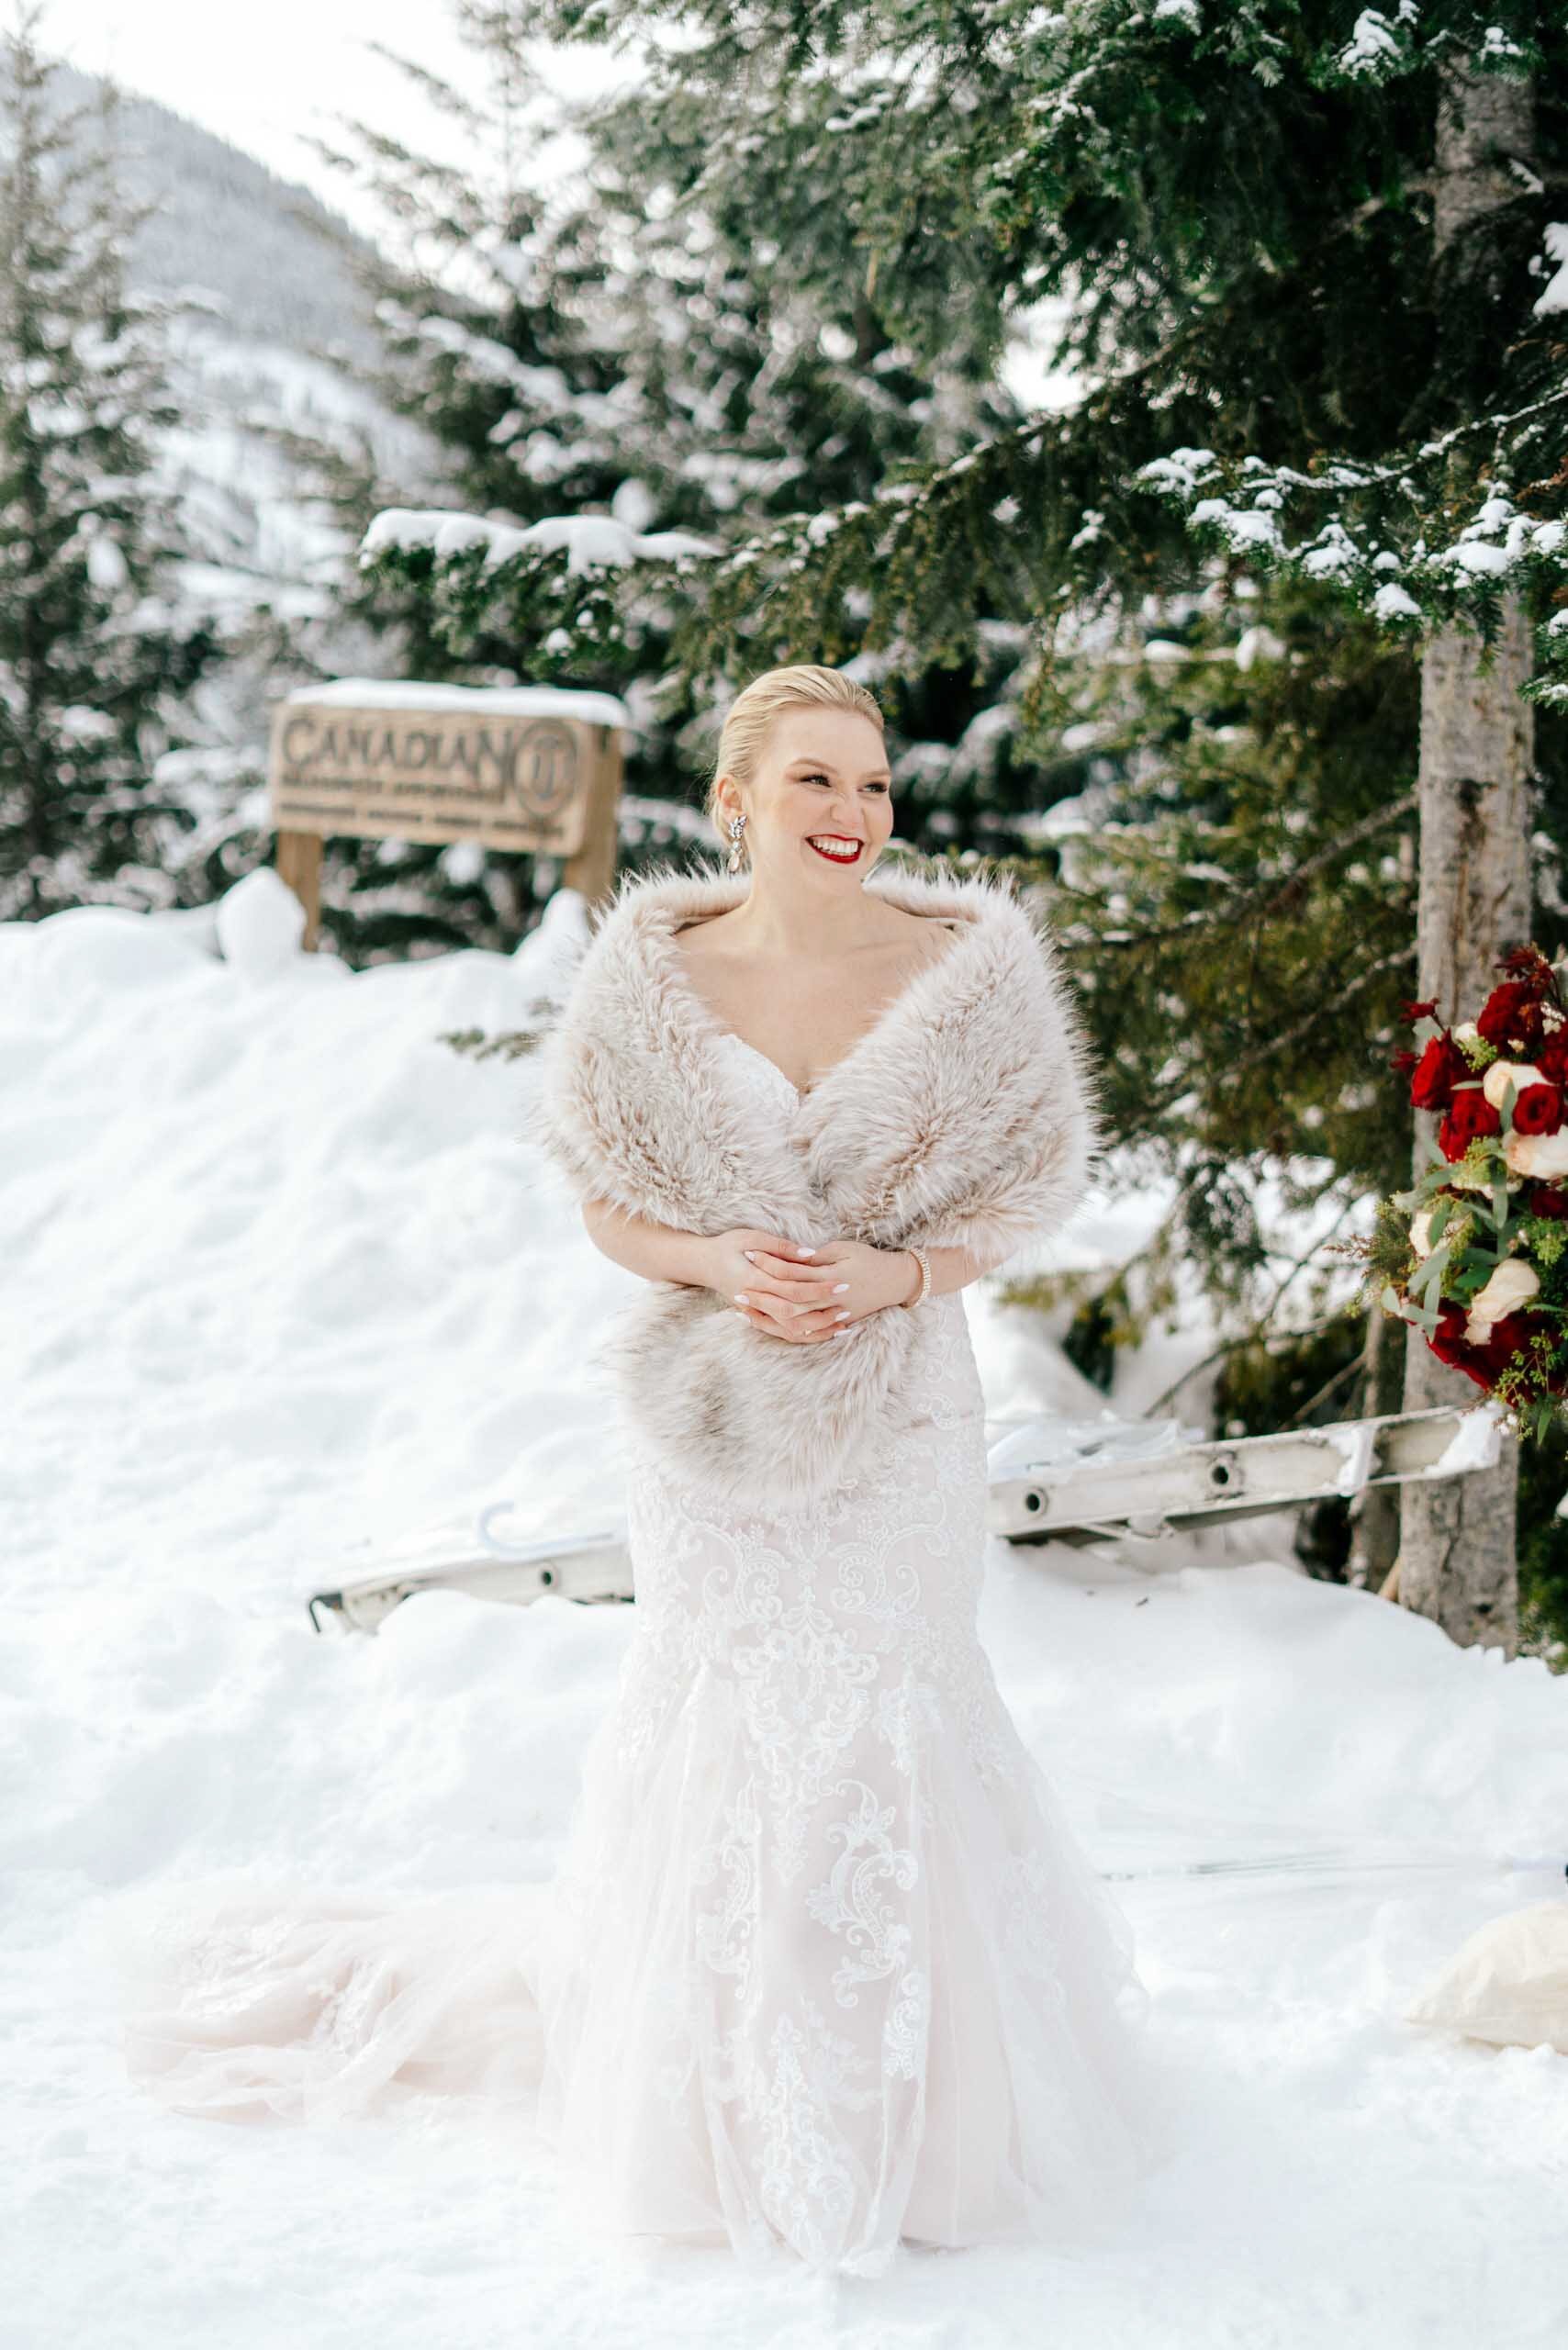 A bride wraps her soft fur stole around herself as she smiles in the snow on her wedding day.